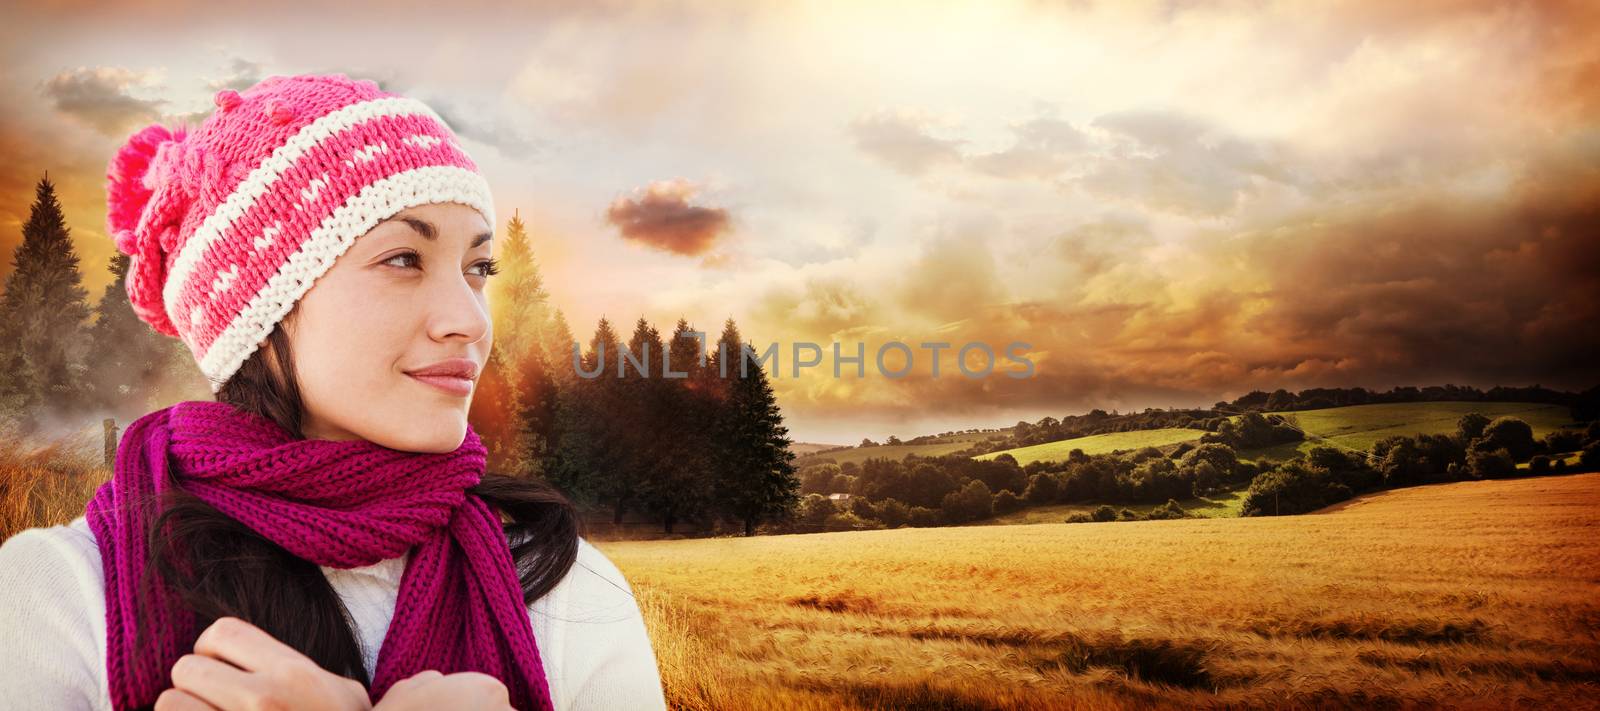 Pretty brunette in winter clothes against country scene